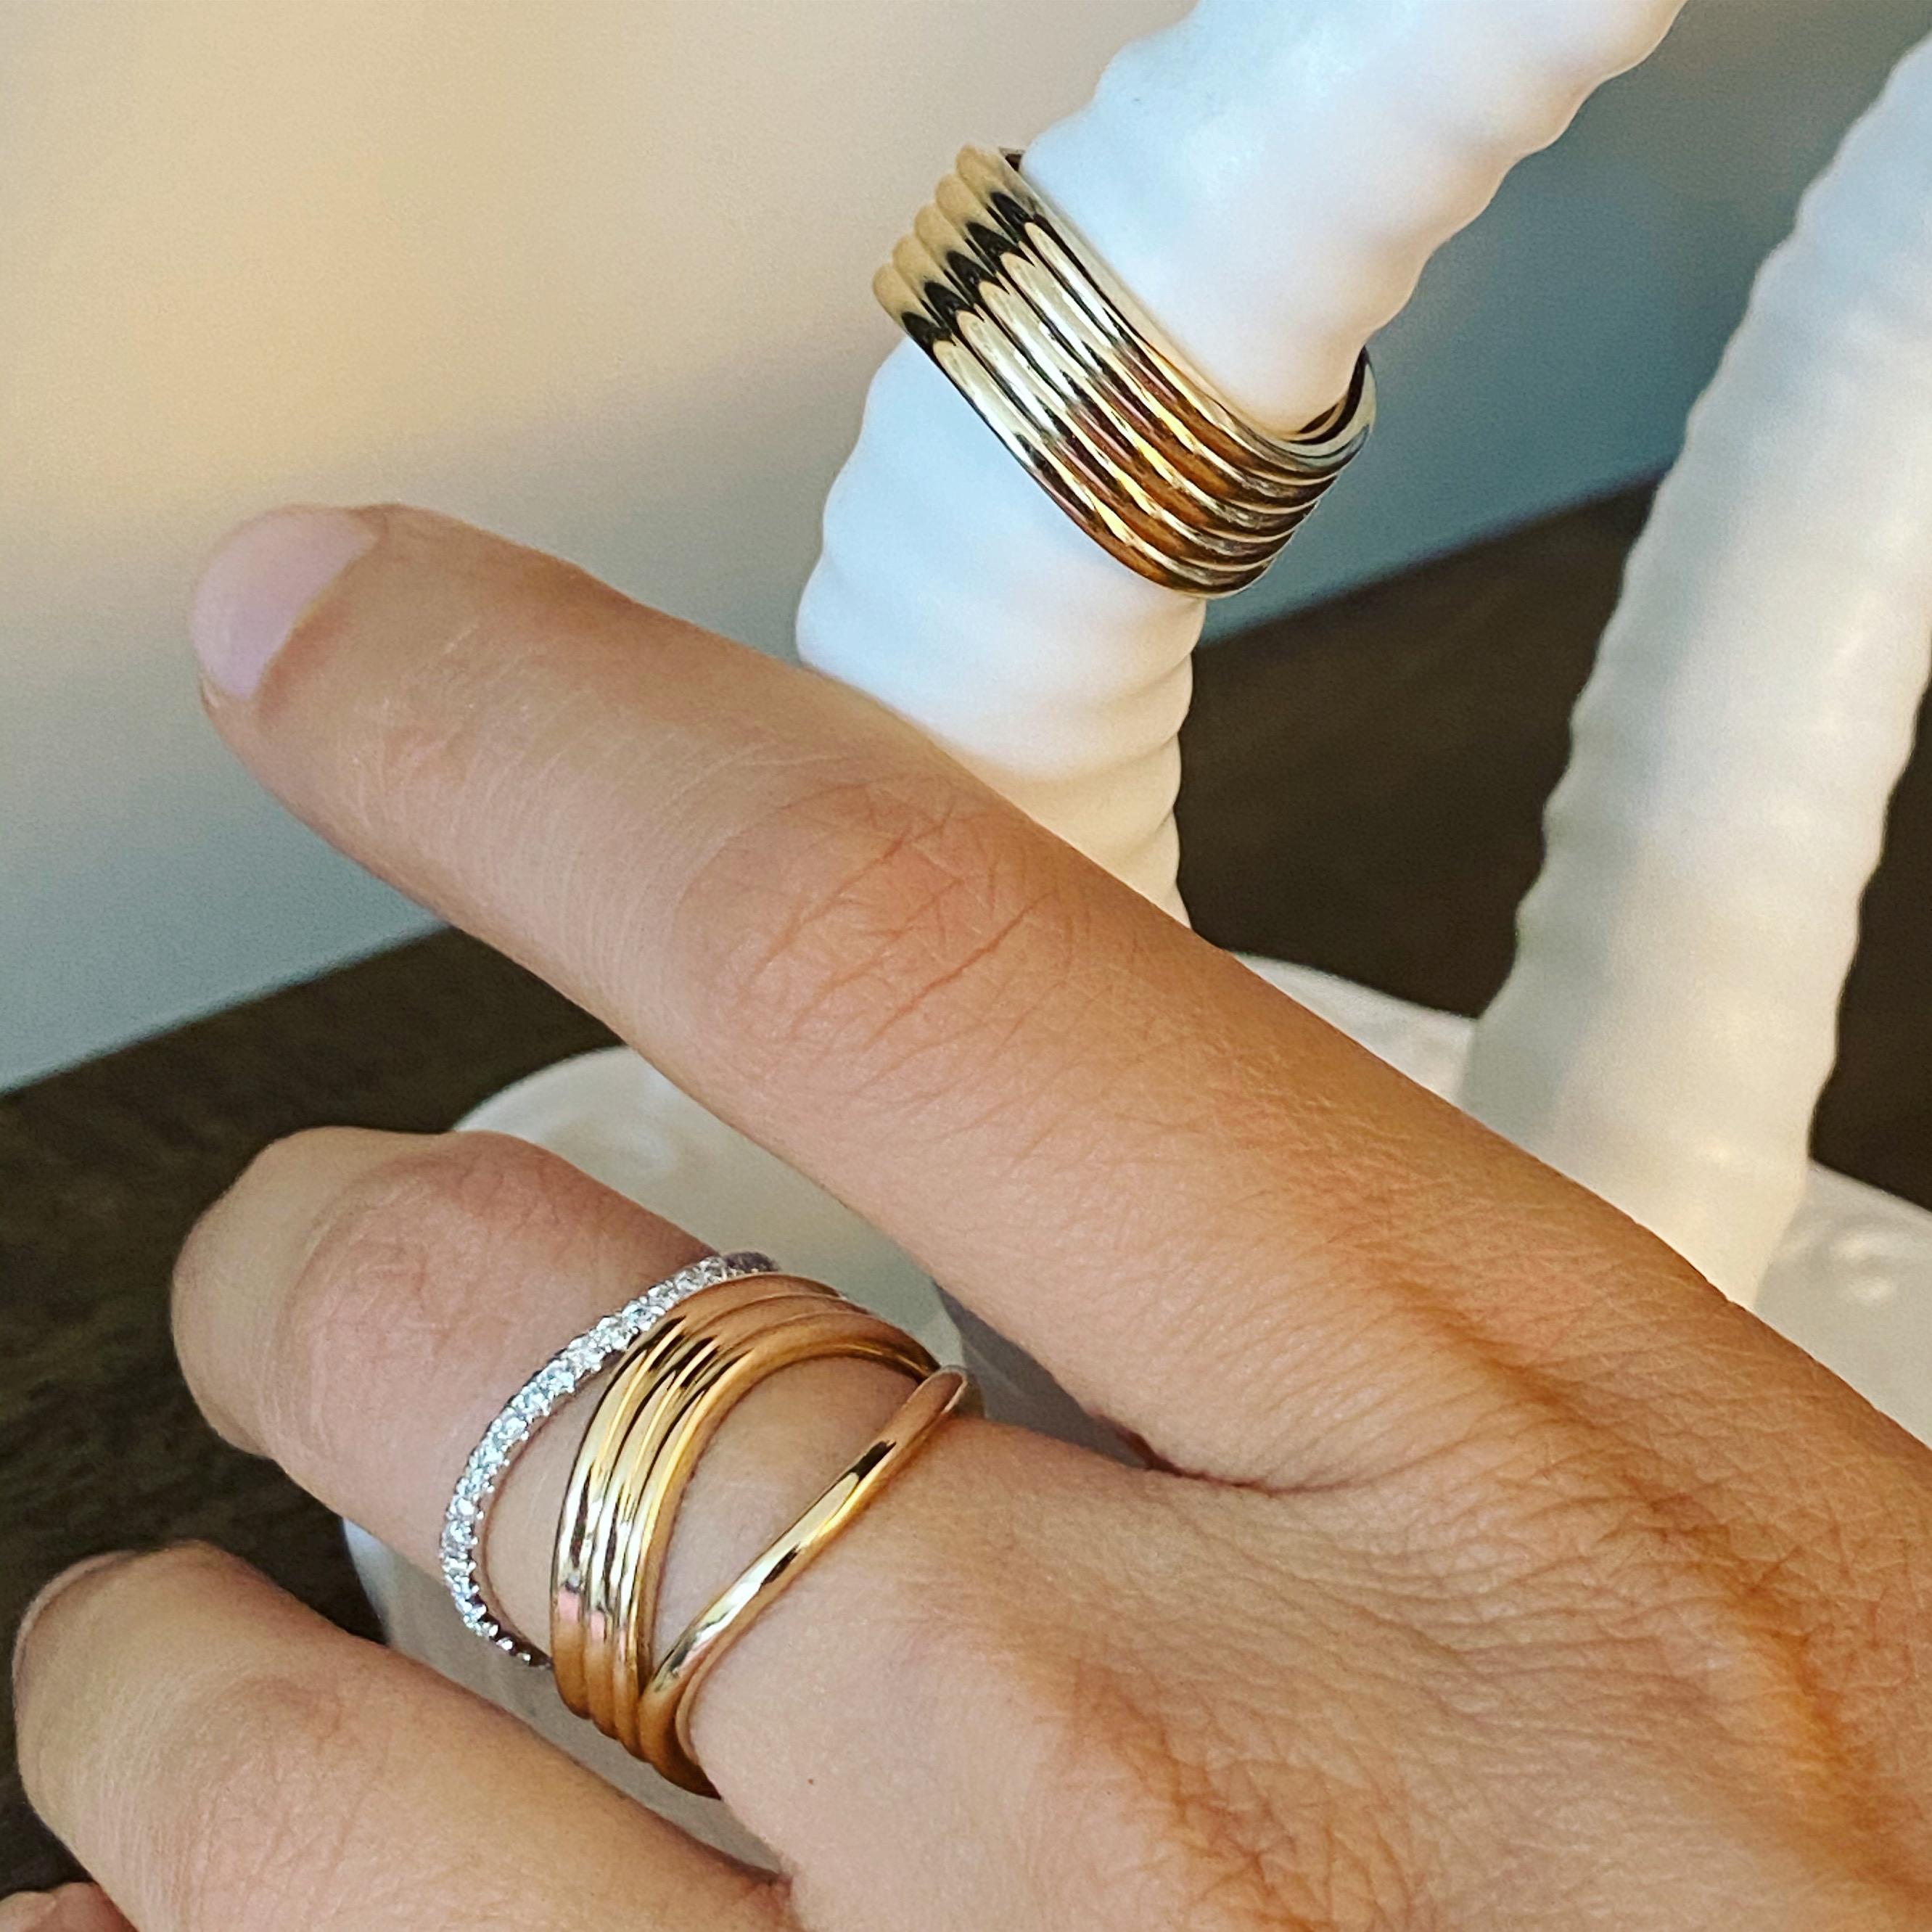 Consisting of an elegant undulating wave of three thin bands, our Bossa Nova Trio Ring looks lovely on its own or stacked with other rings from our Bossa Nova series (available as a set with the diamond version here). Also works great as a masculine